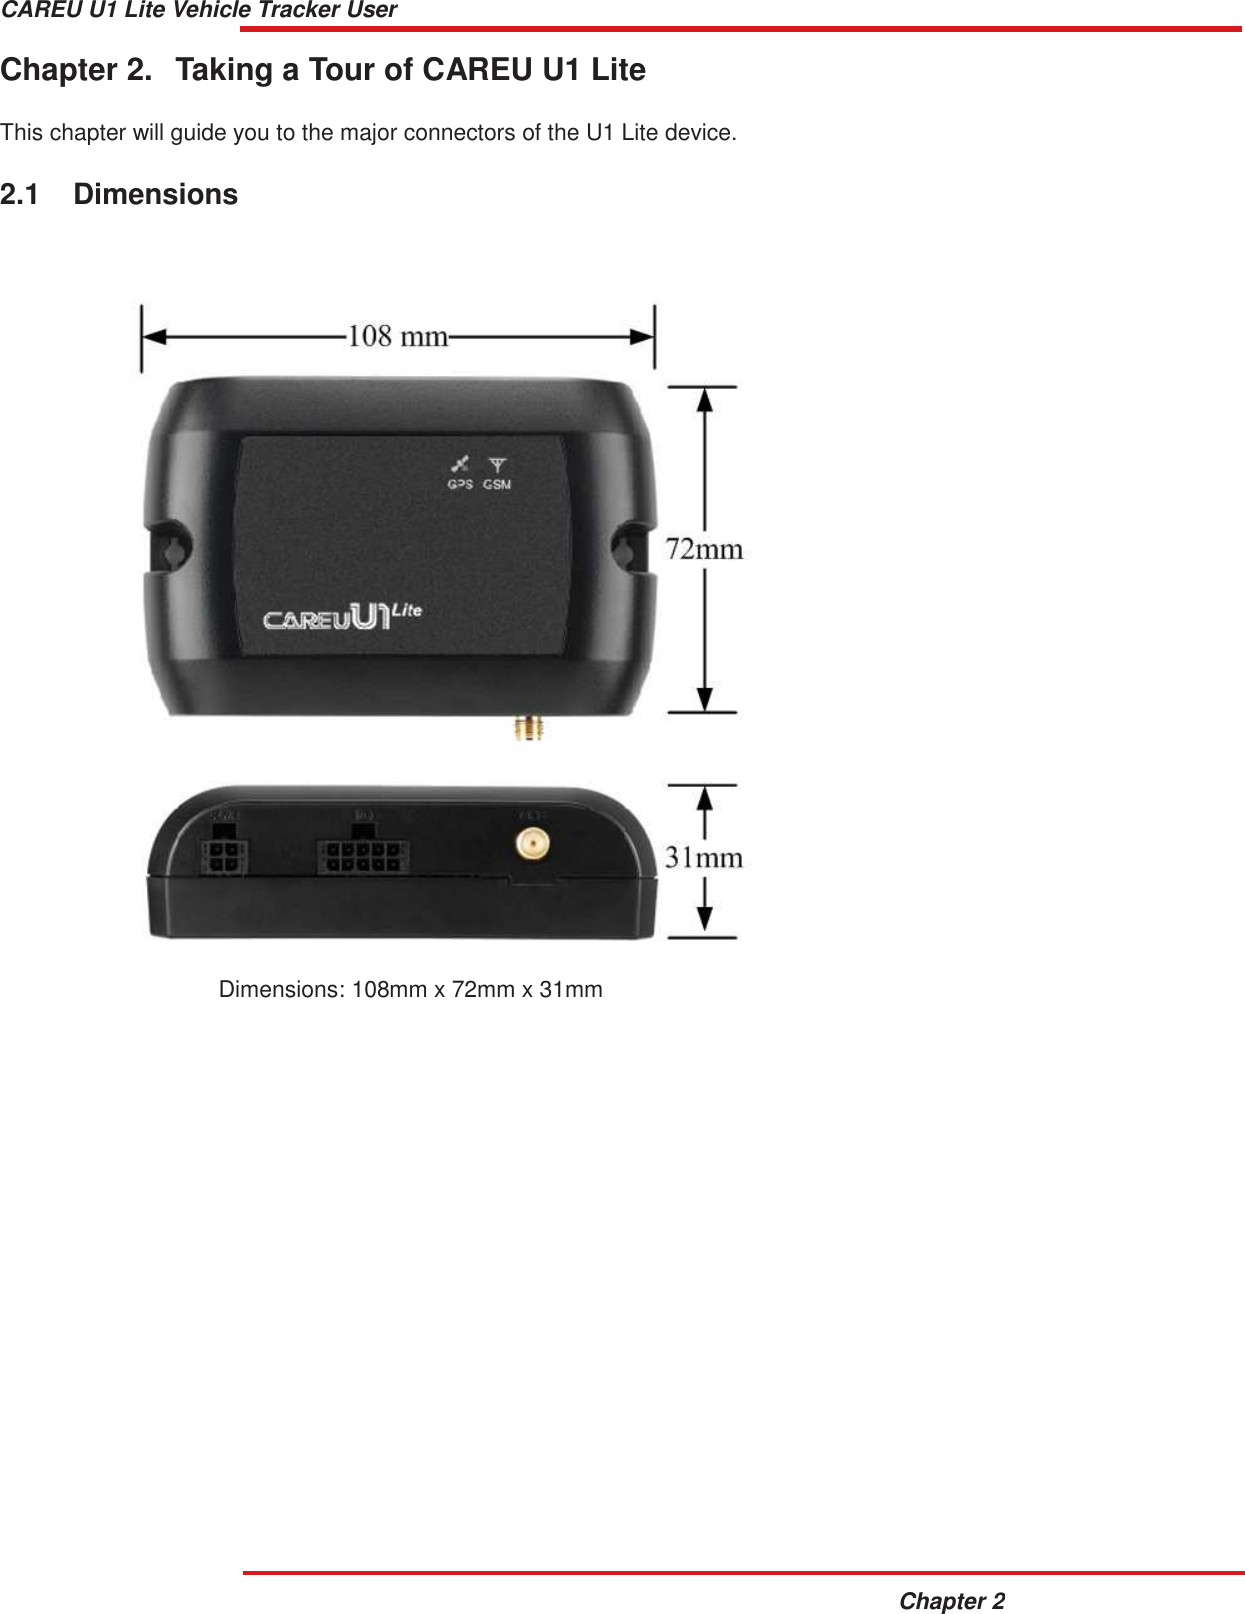 CAREU U1 Lite Vehicle Tracker User Guide Chapter 2    Chapter 2.  Taking a Tour of CAREU U1 Lite   This chapter will guide you to the major connectors of the U1 Lite device.   2.1  Dimensions            Dimensions: 108mm x 72mm x 31mm 